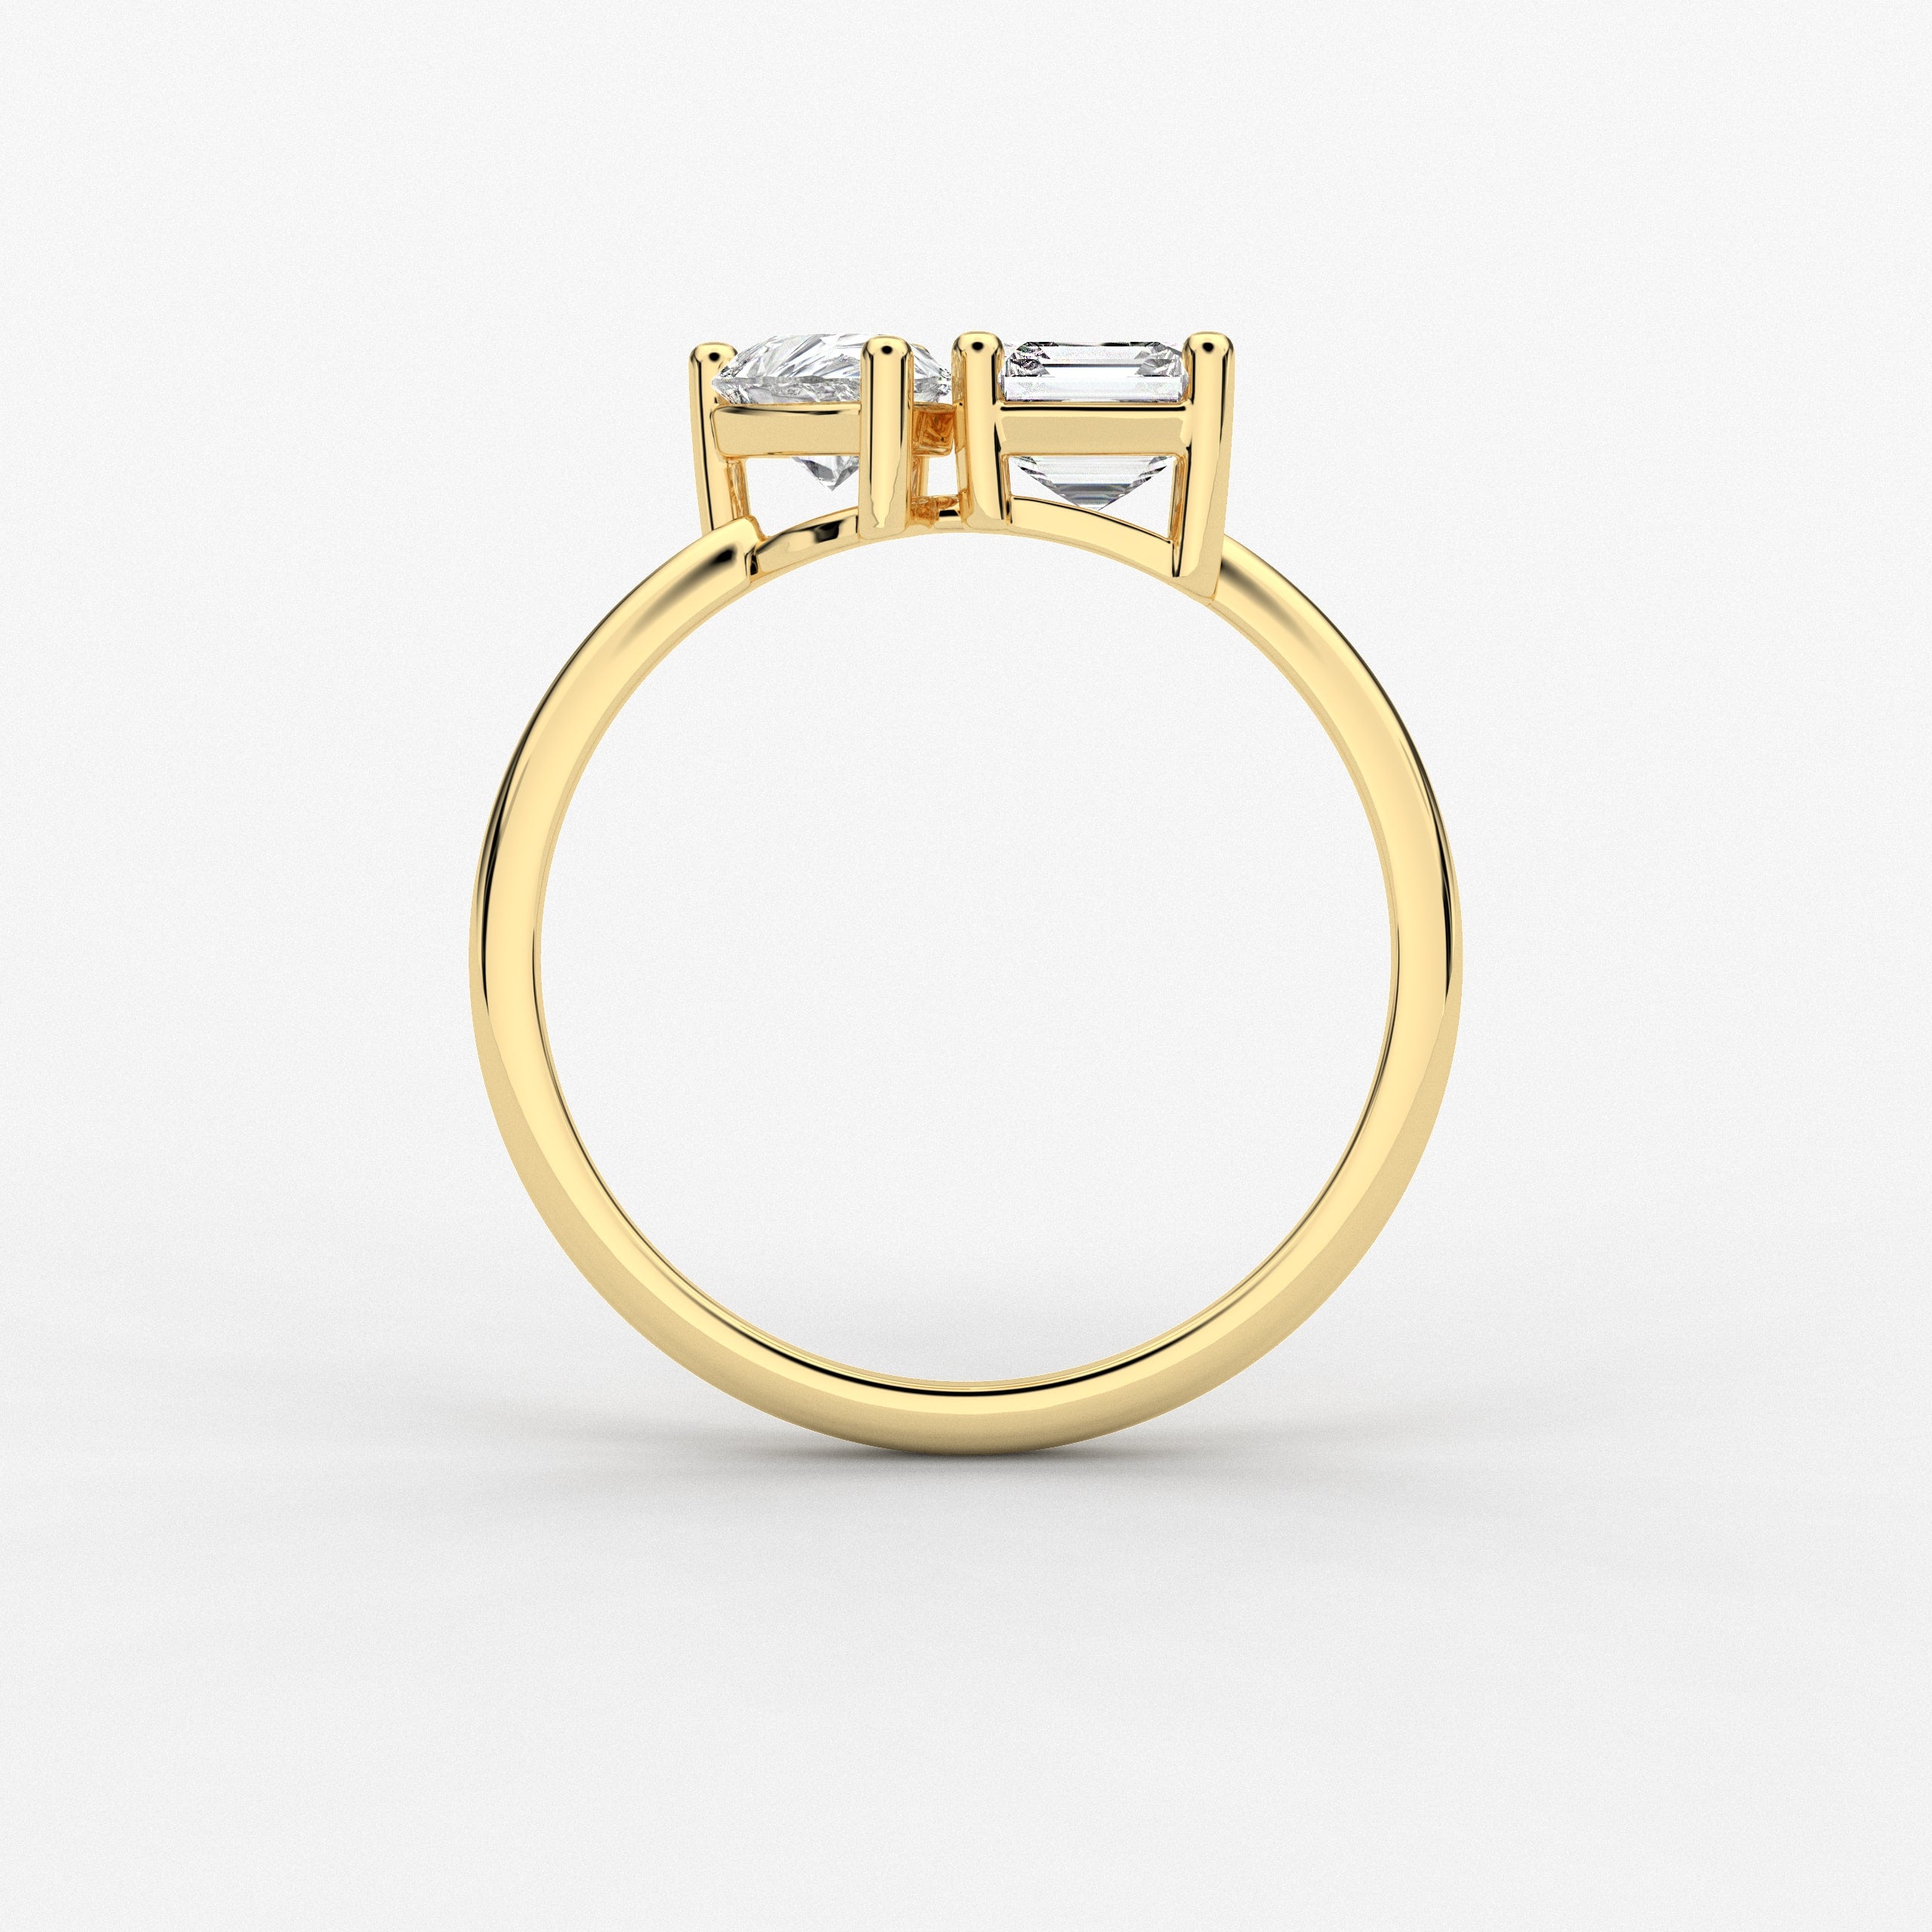 ASSCHER AND PEAR CUT TOI ET MOI MOISSANITE ENGAGEMENT RING IN YELLOW GOLD